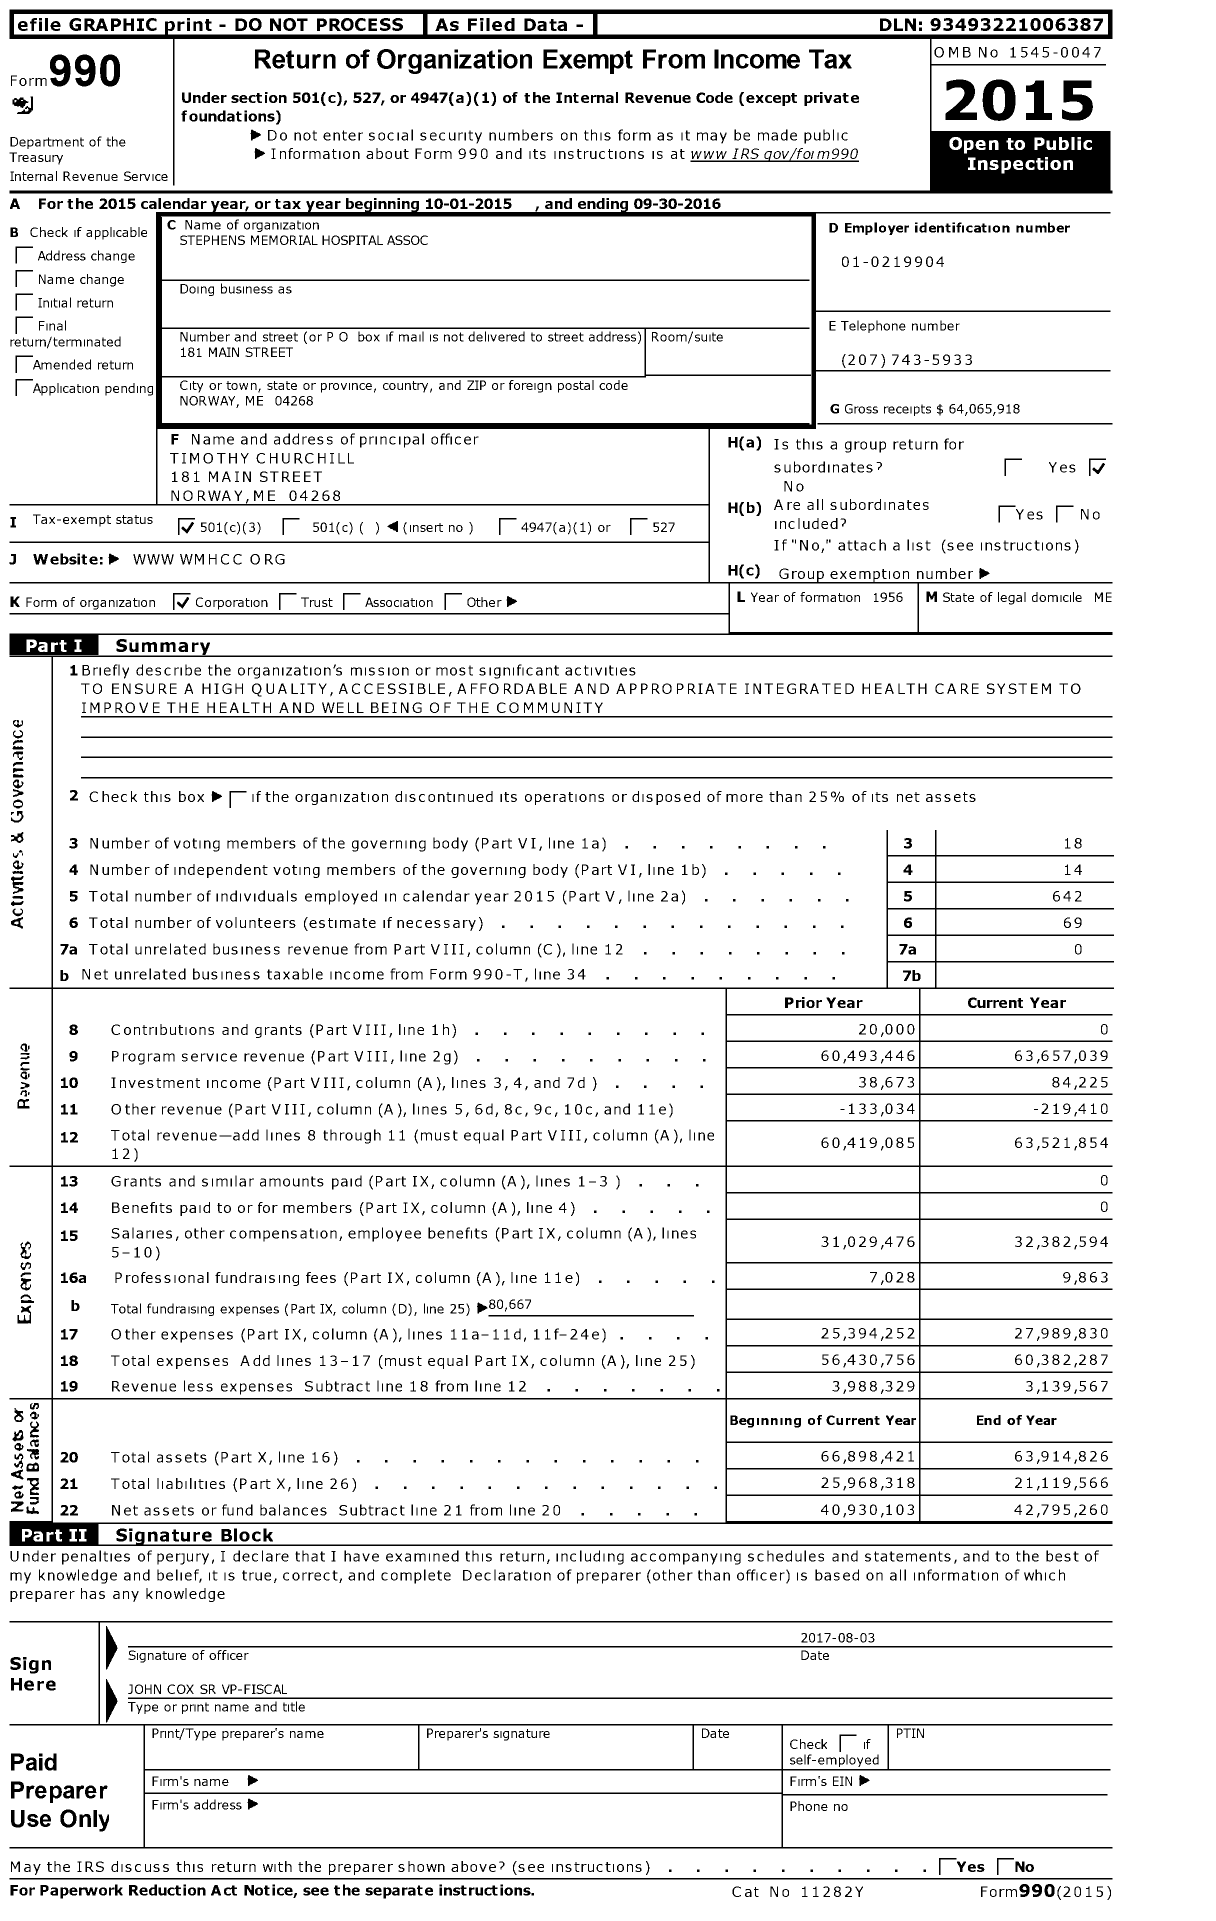 Image of first page of 2015 Form 990 for Stephens Memorial Hospital Assoc (SMH)